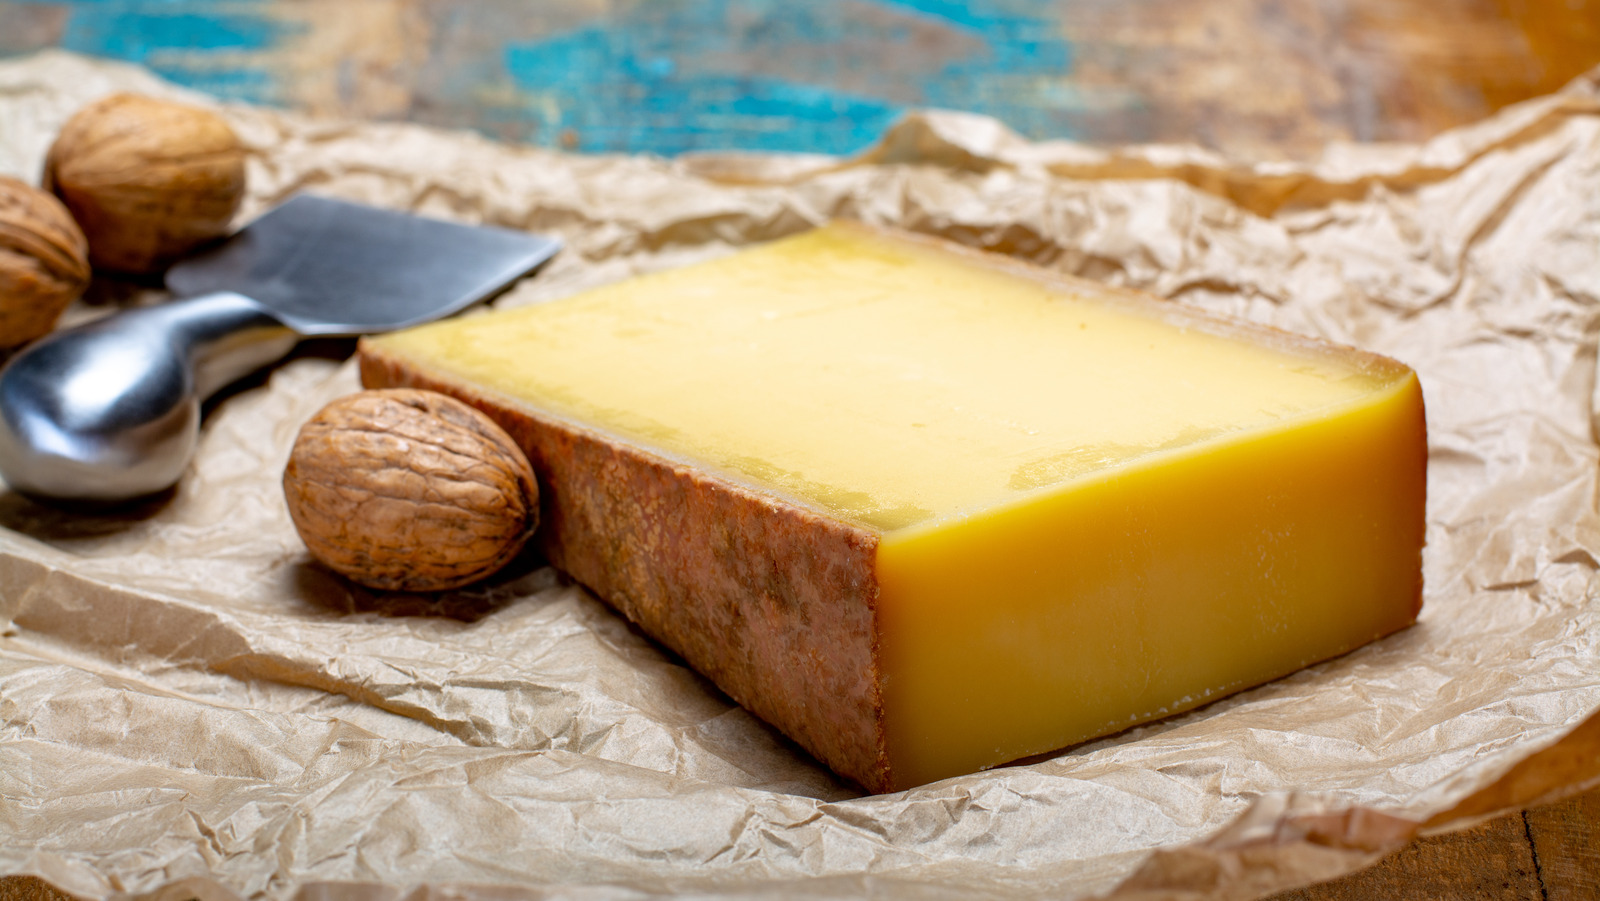 Is Gruyère Still Gruyère if It Doesn't Come From Gruyères? - The